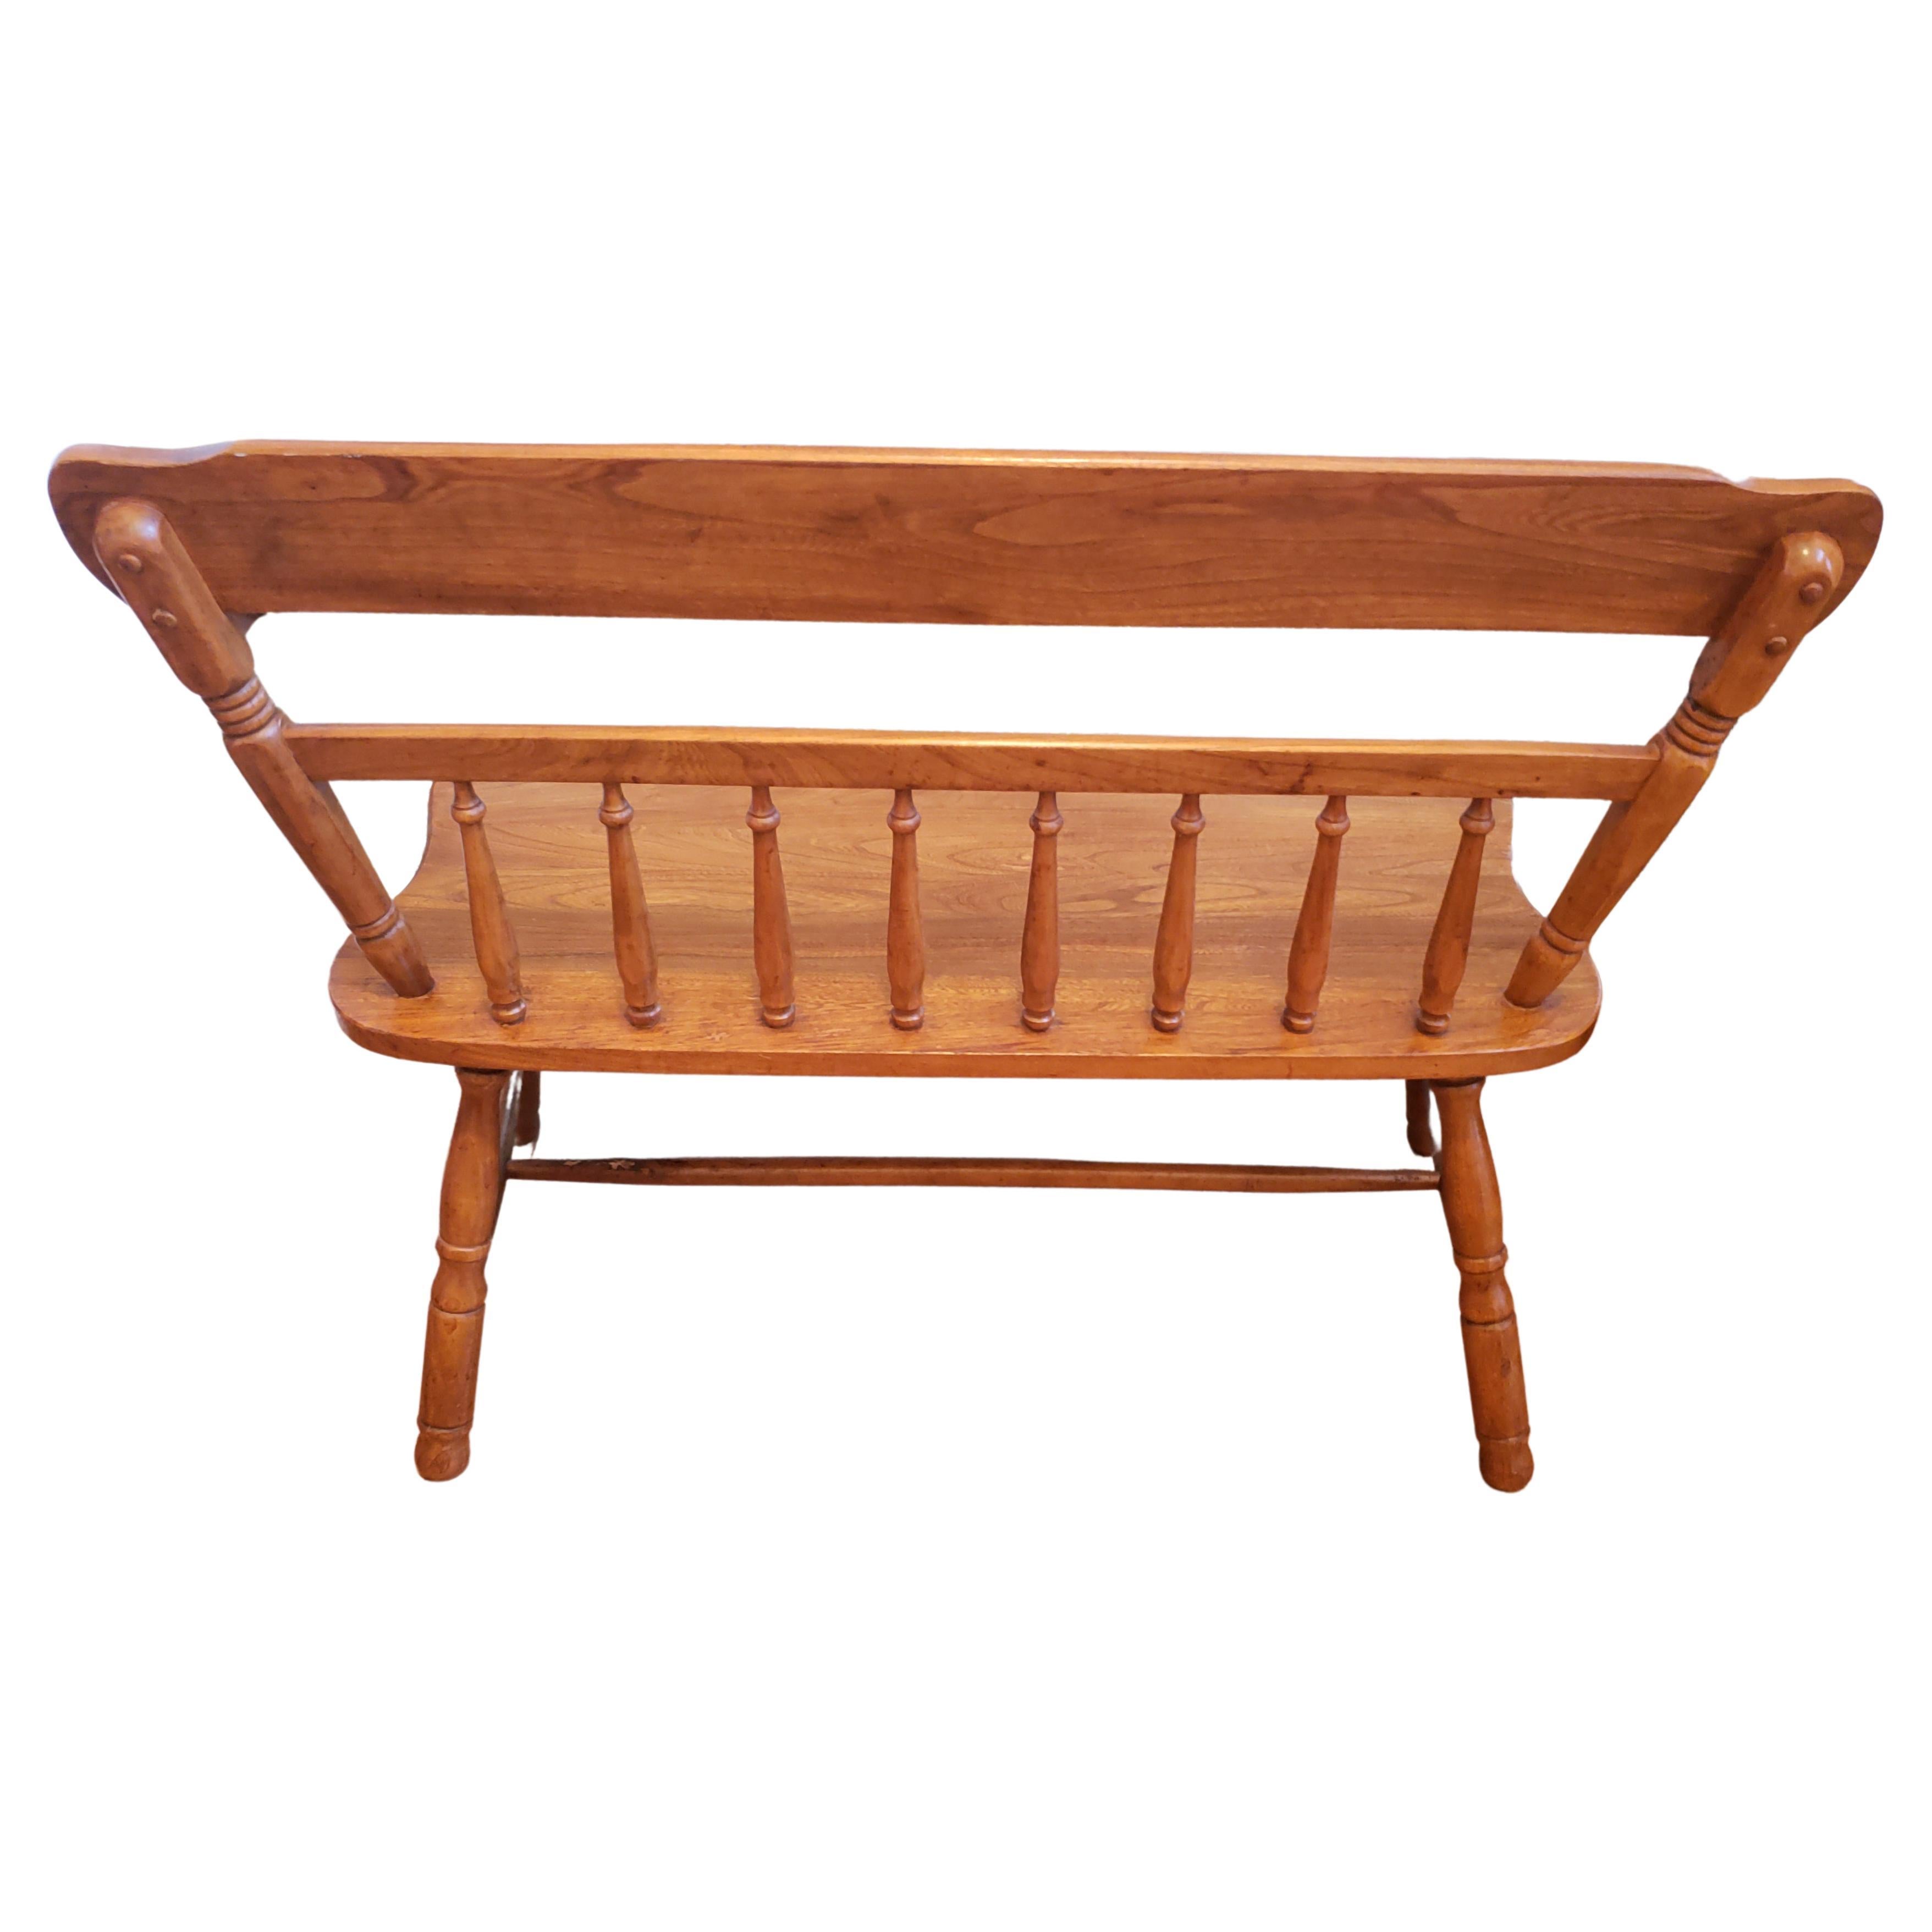 Country Solid Red Oak Farm House Style Two-Seat Bench Settee, Circa 1970s For Sale